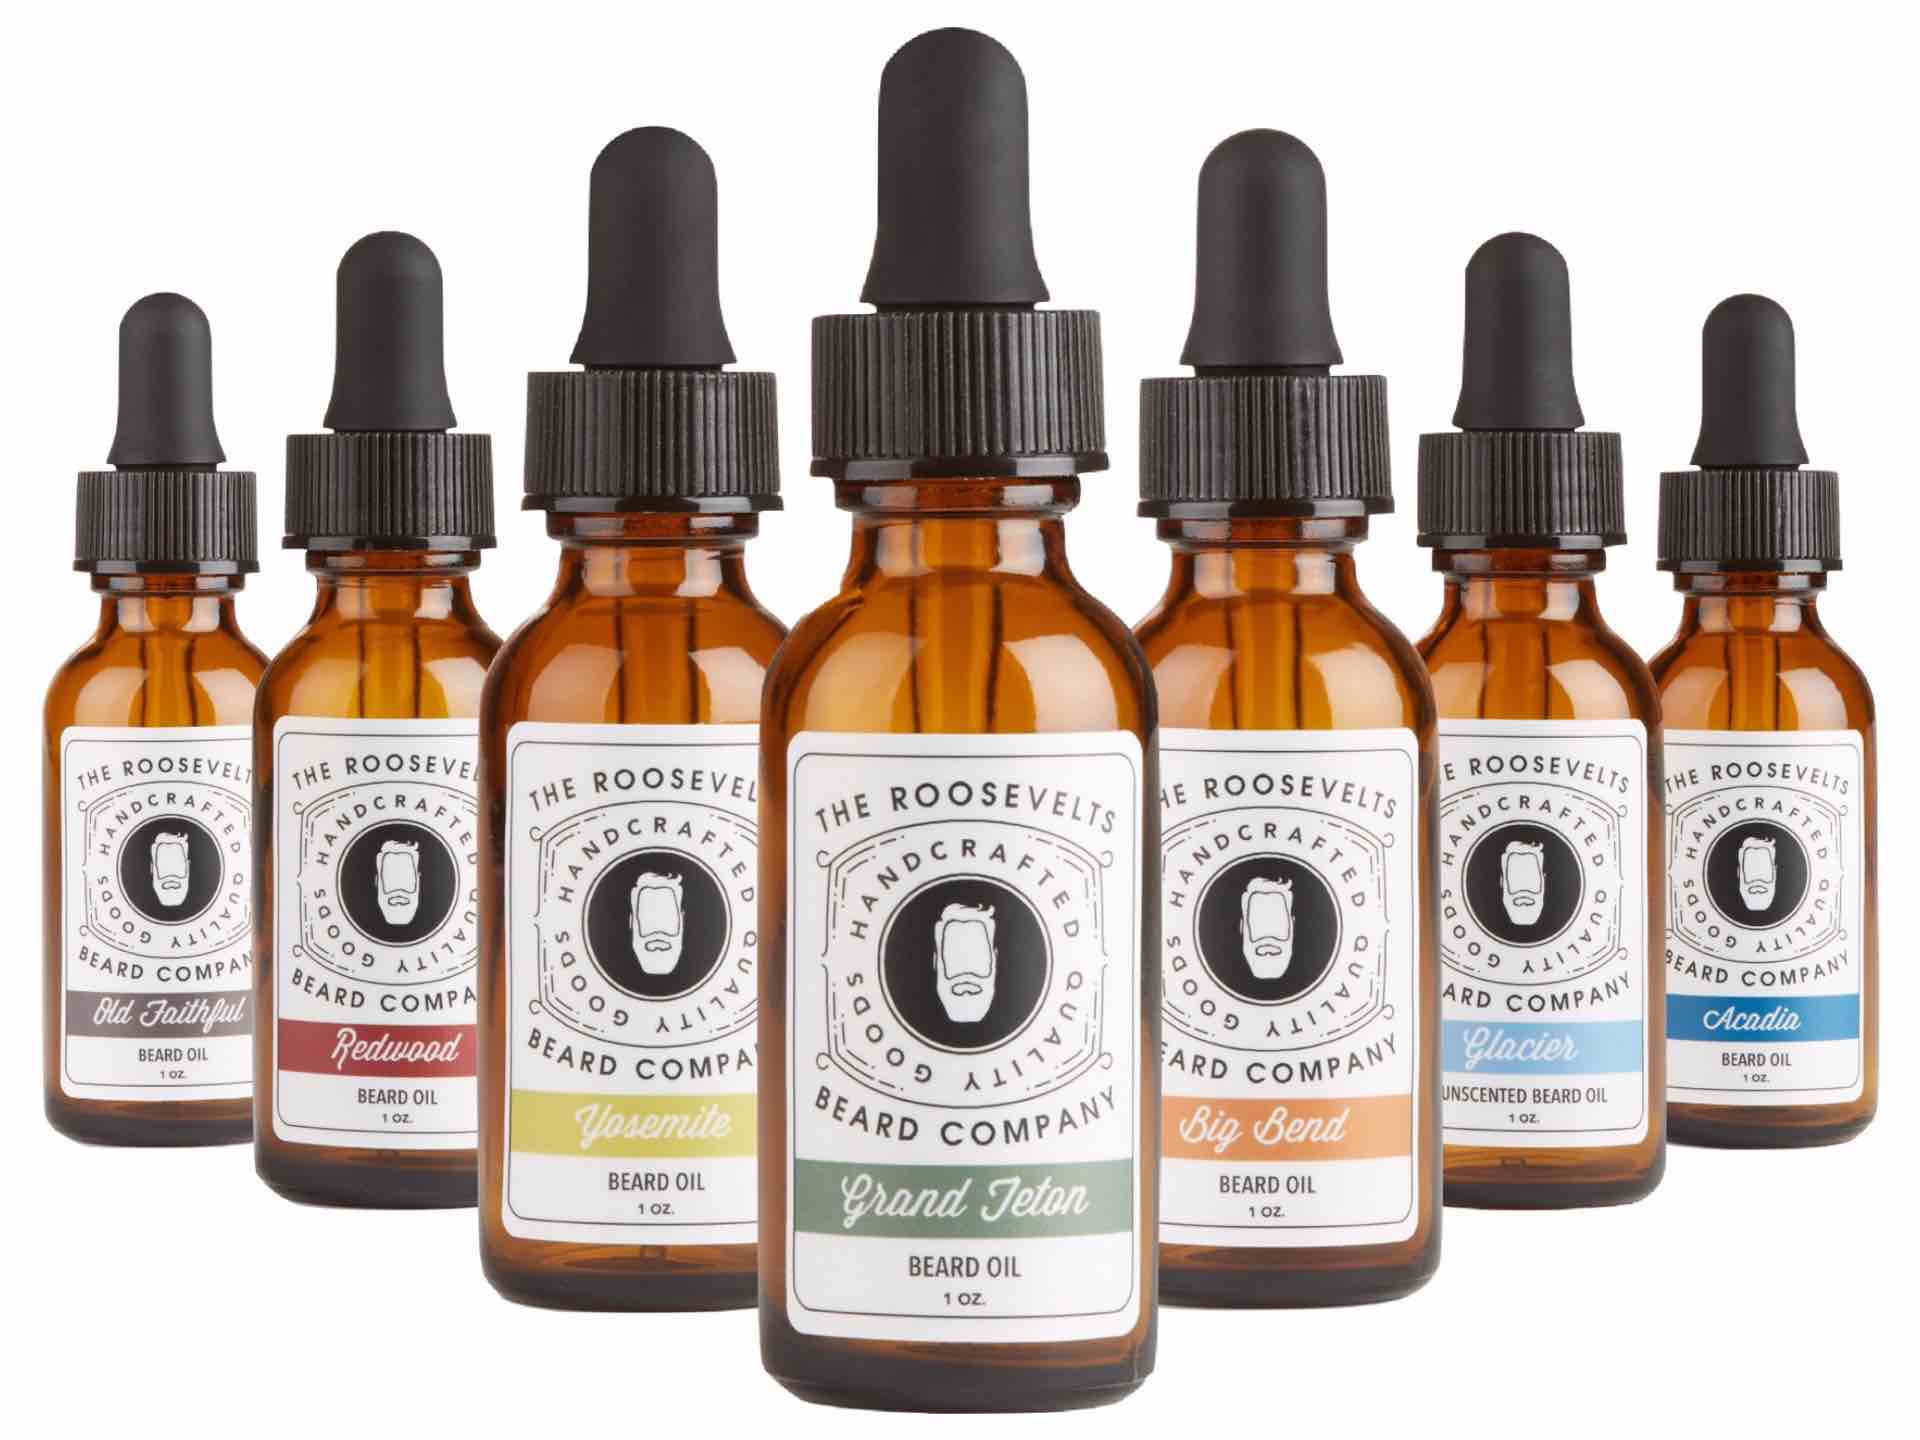 National Parks beard oils by The Roosevelts Beard Company. ($20–$25 per one-ounce bottle)